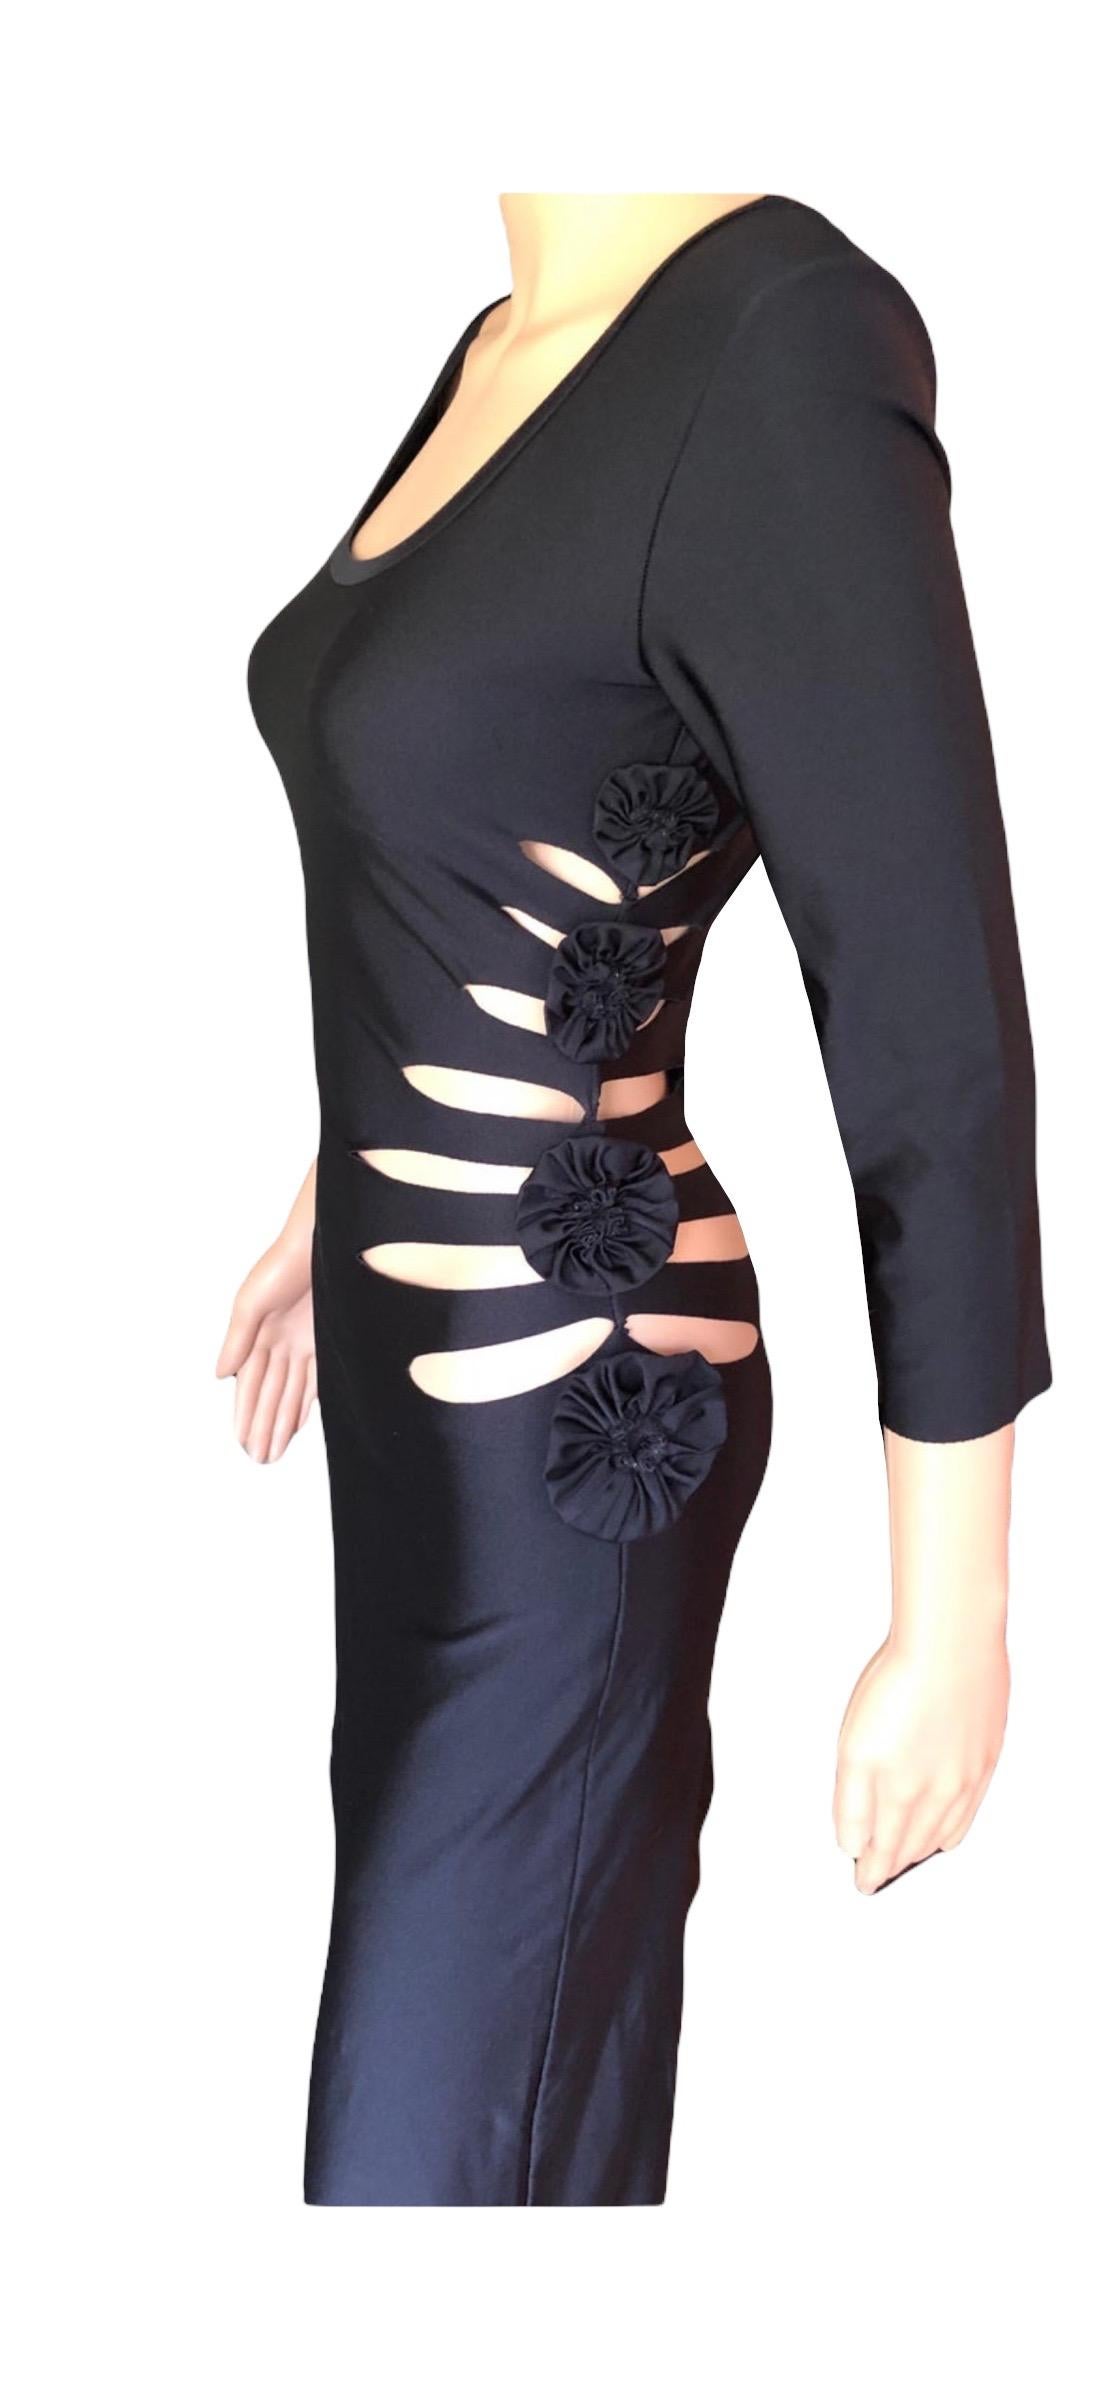 Jean Paul Gaultier Soleil Cutout Bodycon Black Maxi Dress In Good Condition For Sale In Naples, FL